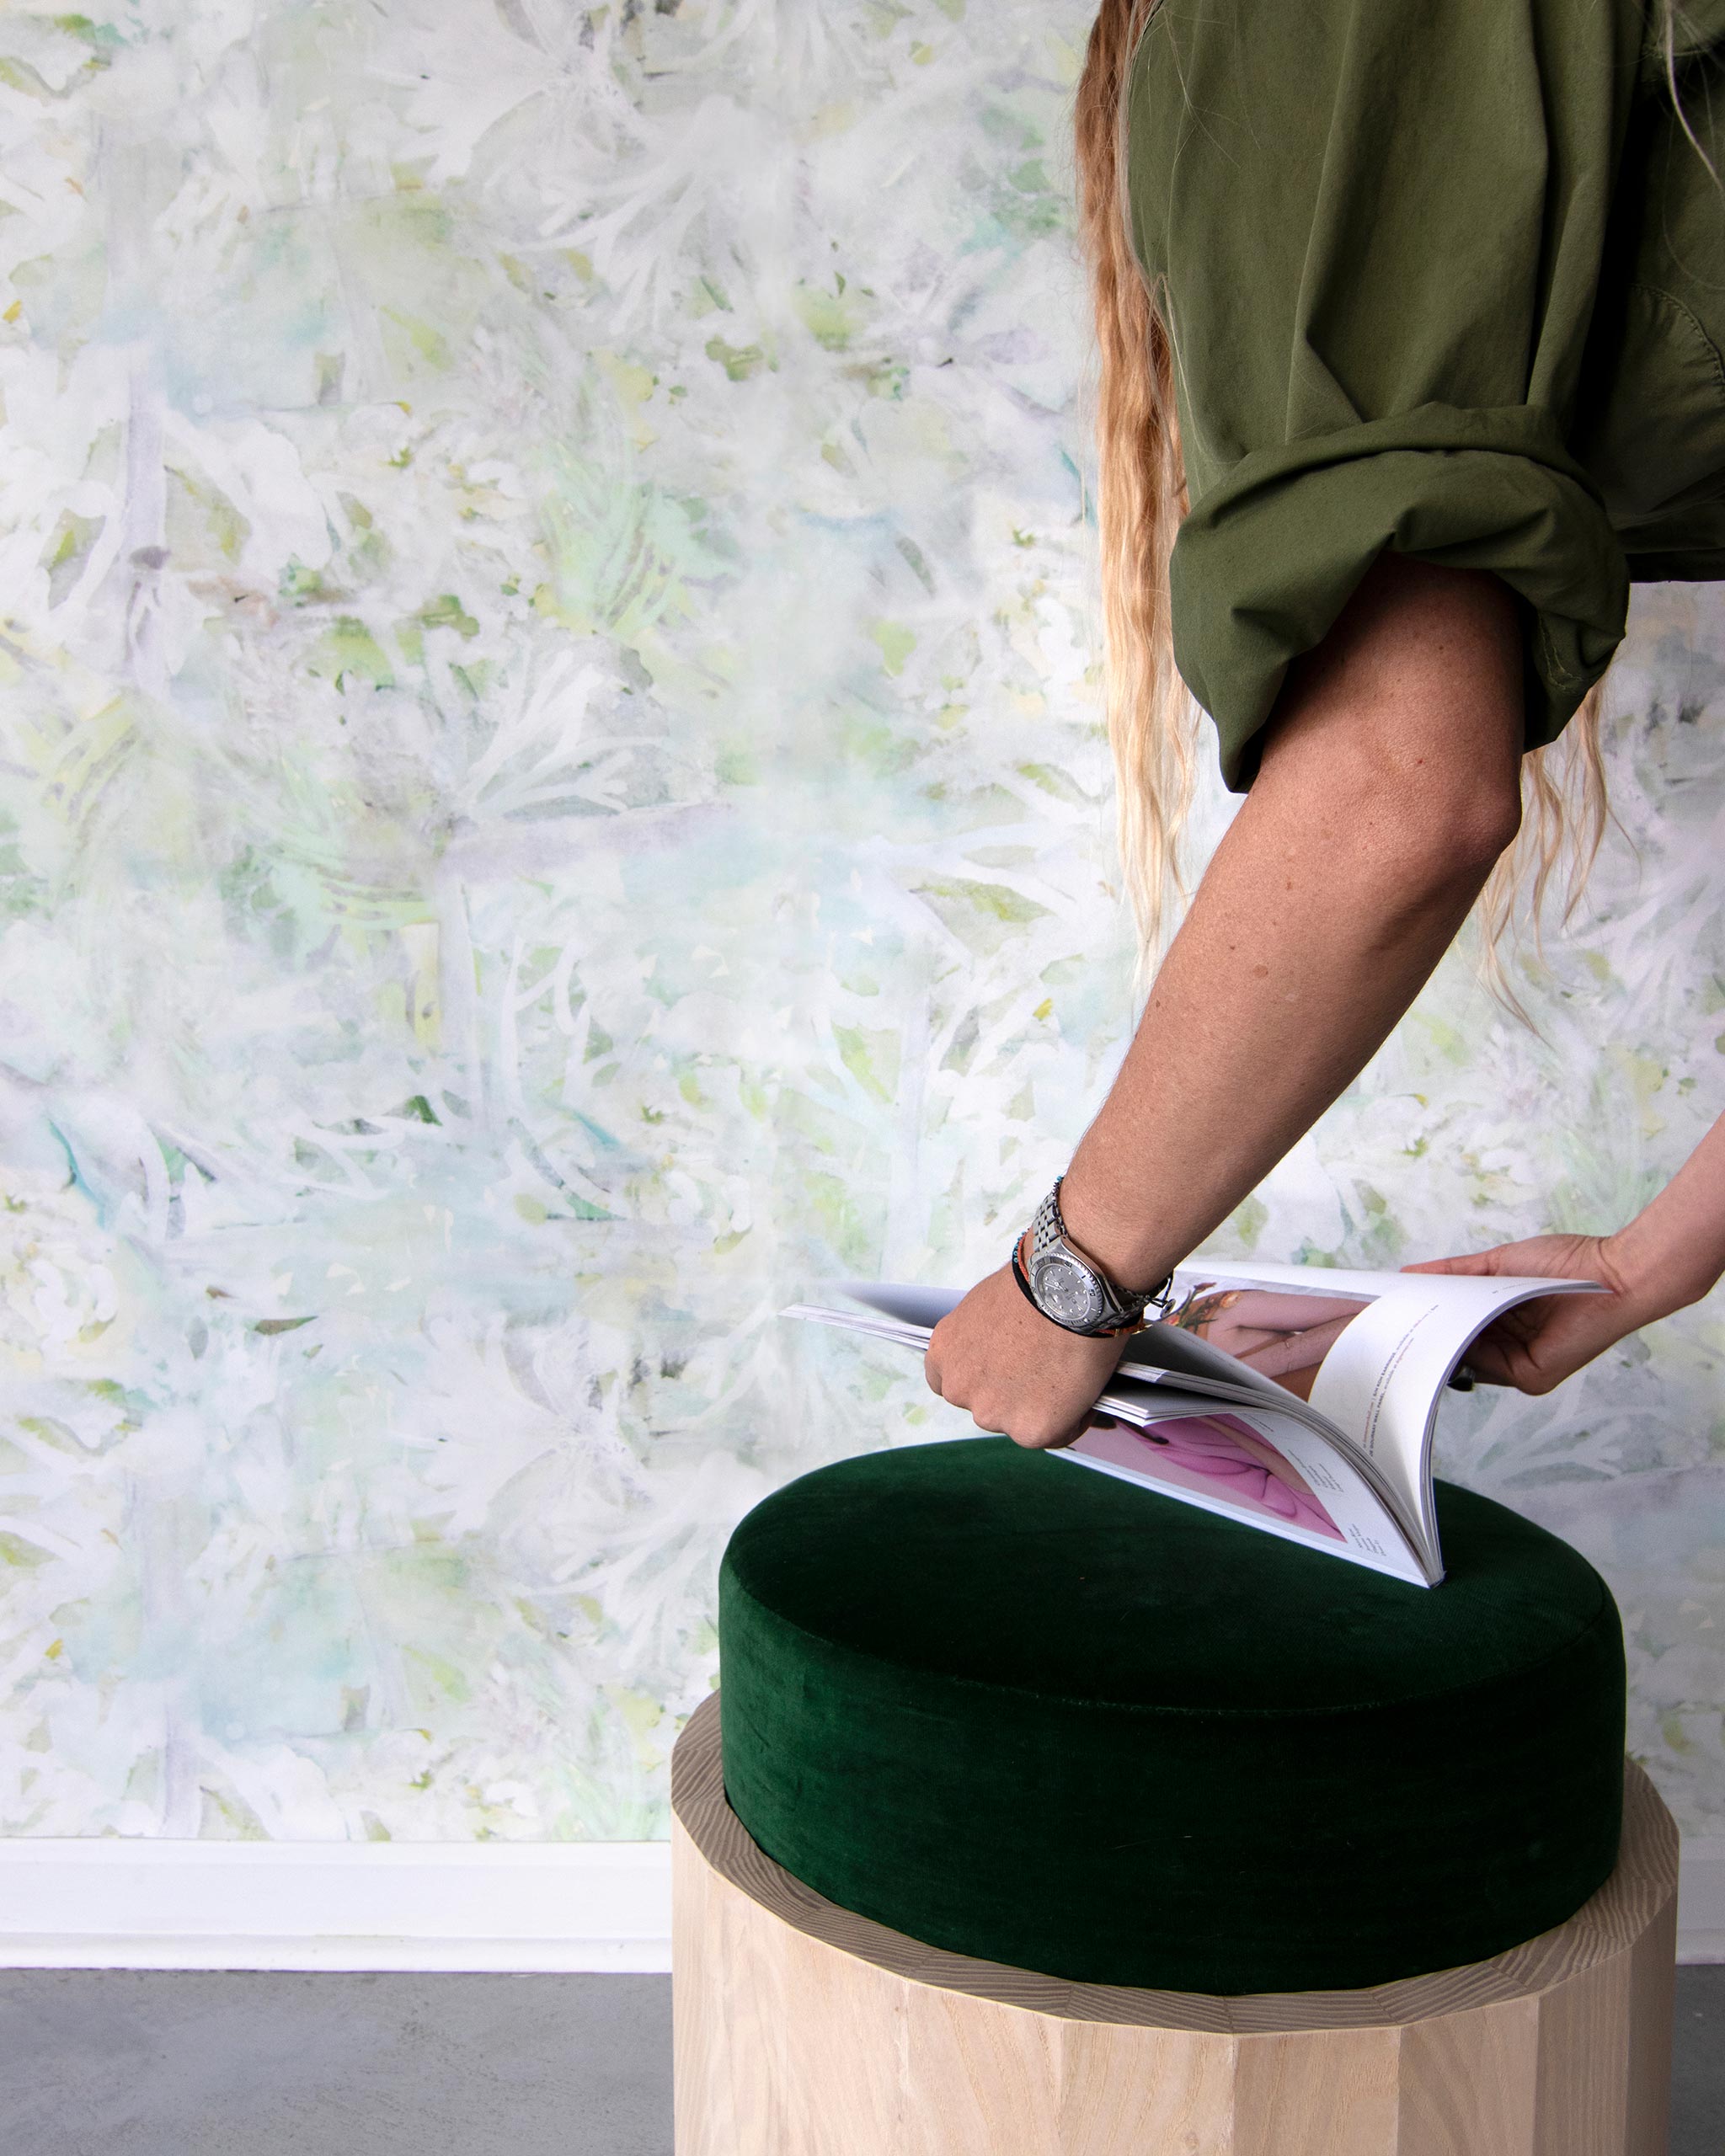 A woman opens a catalog in front of a wall papered in an abstract painted print in shades of green, yellow and white.